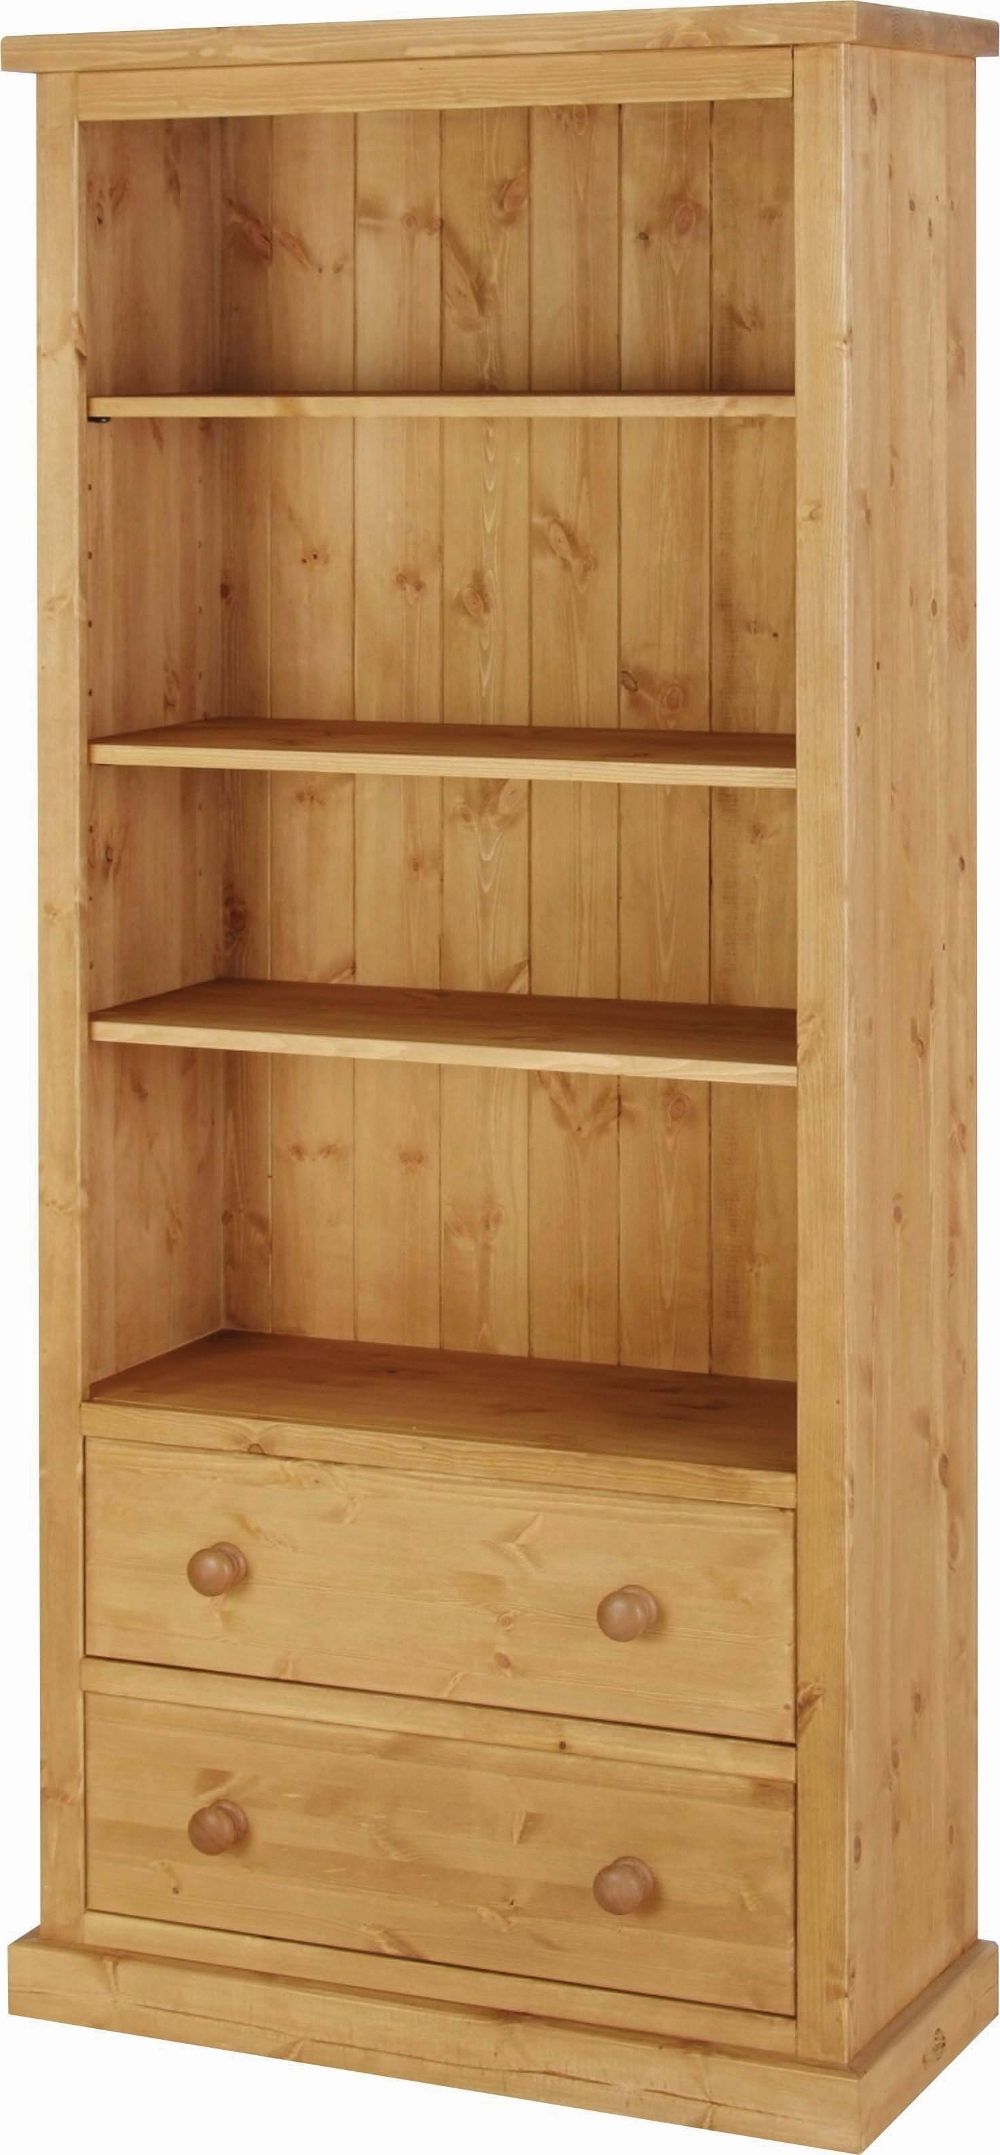 Most Up To Date Bookcases With Drawers Regarding Bookcases Ideas: Bookcases With Drawers Buy Bookcases With Drawers (View 14 of 15)